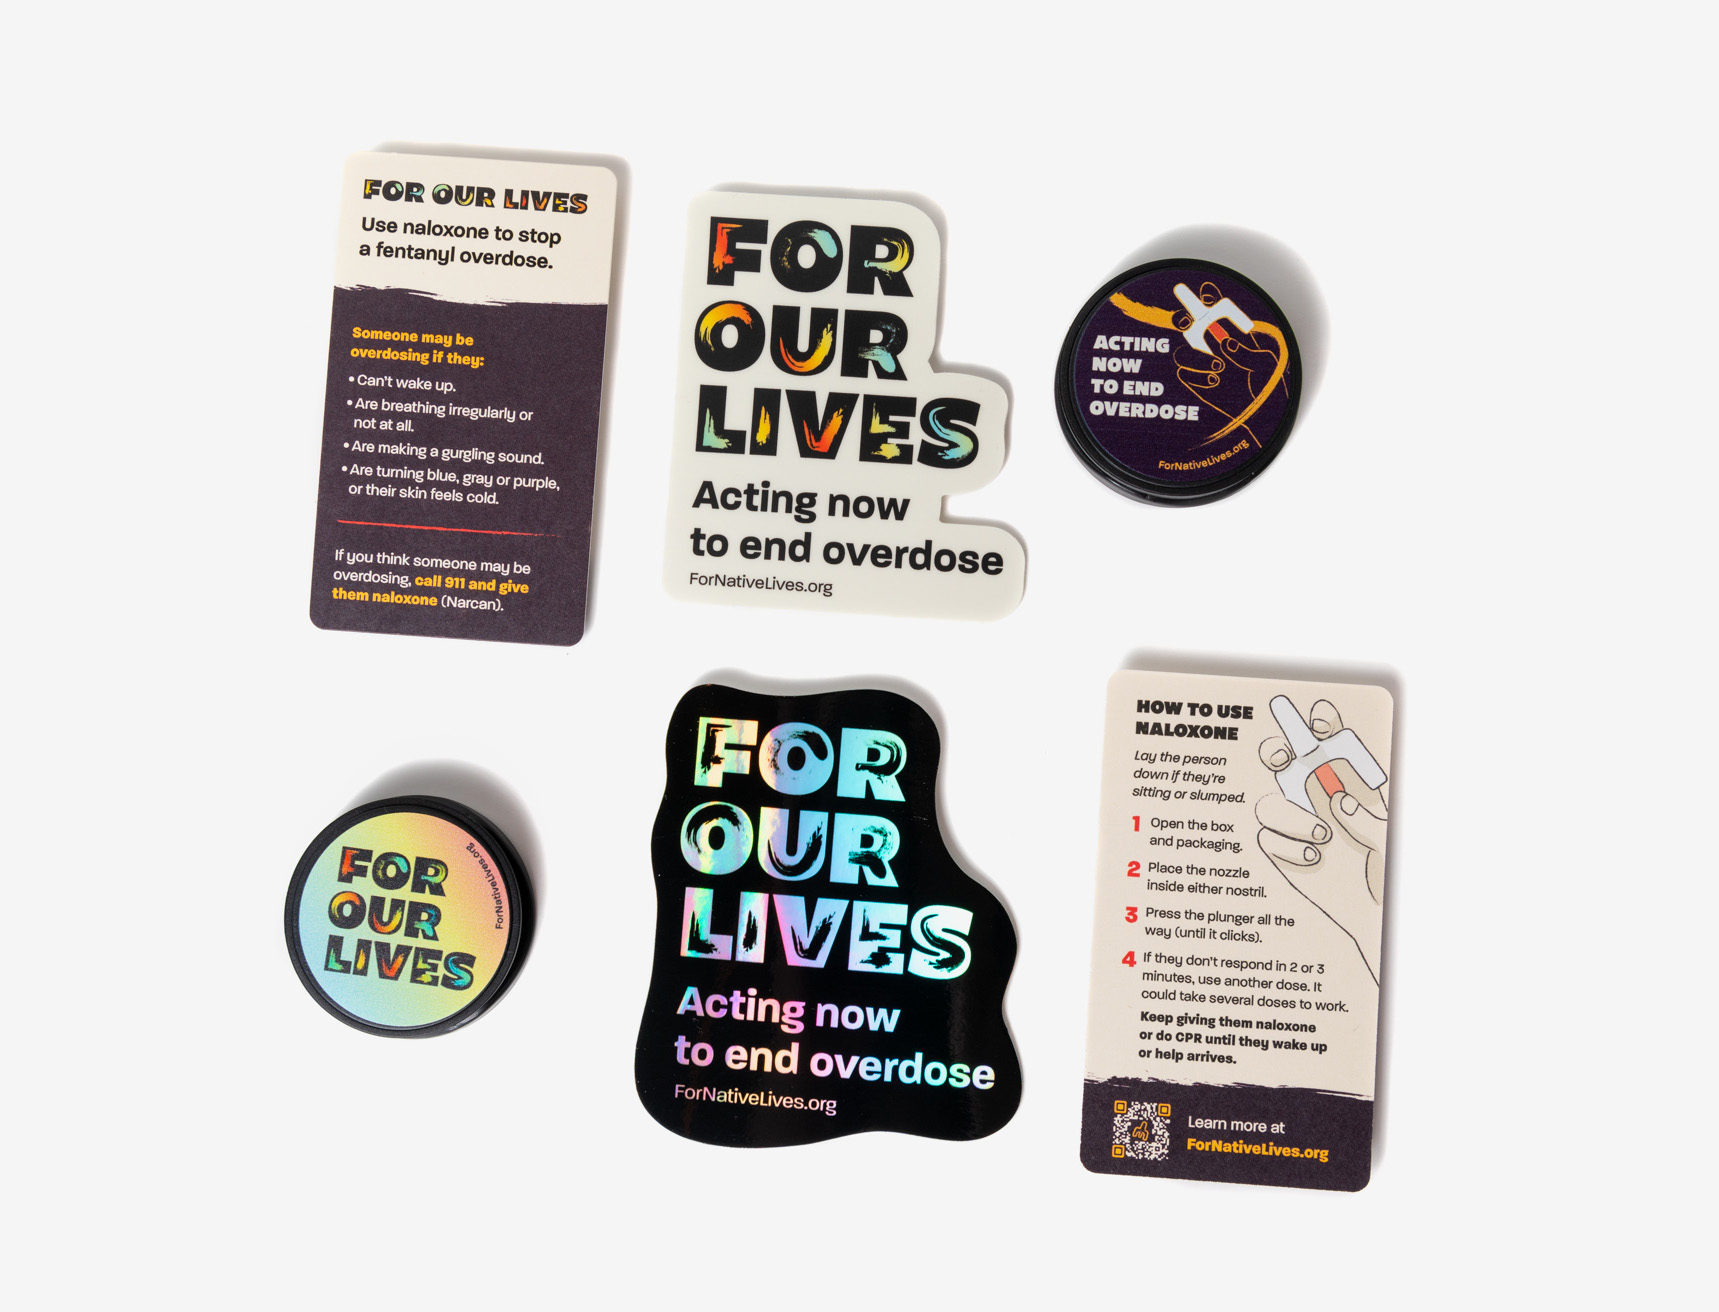 For Our Lives campaign stickers buttons and other materials for native audiences to prevent overdose deaths